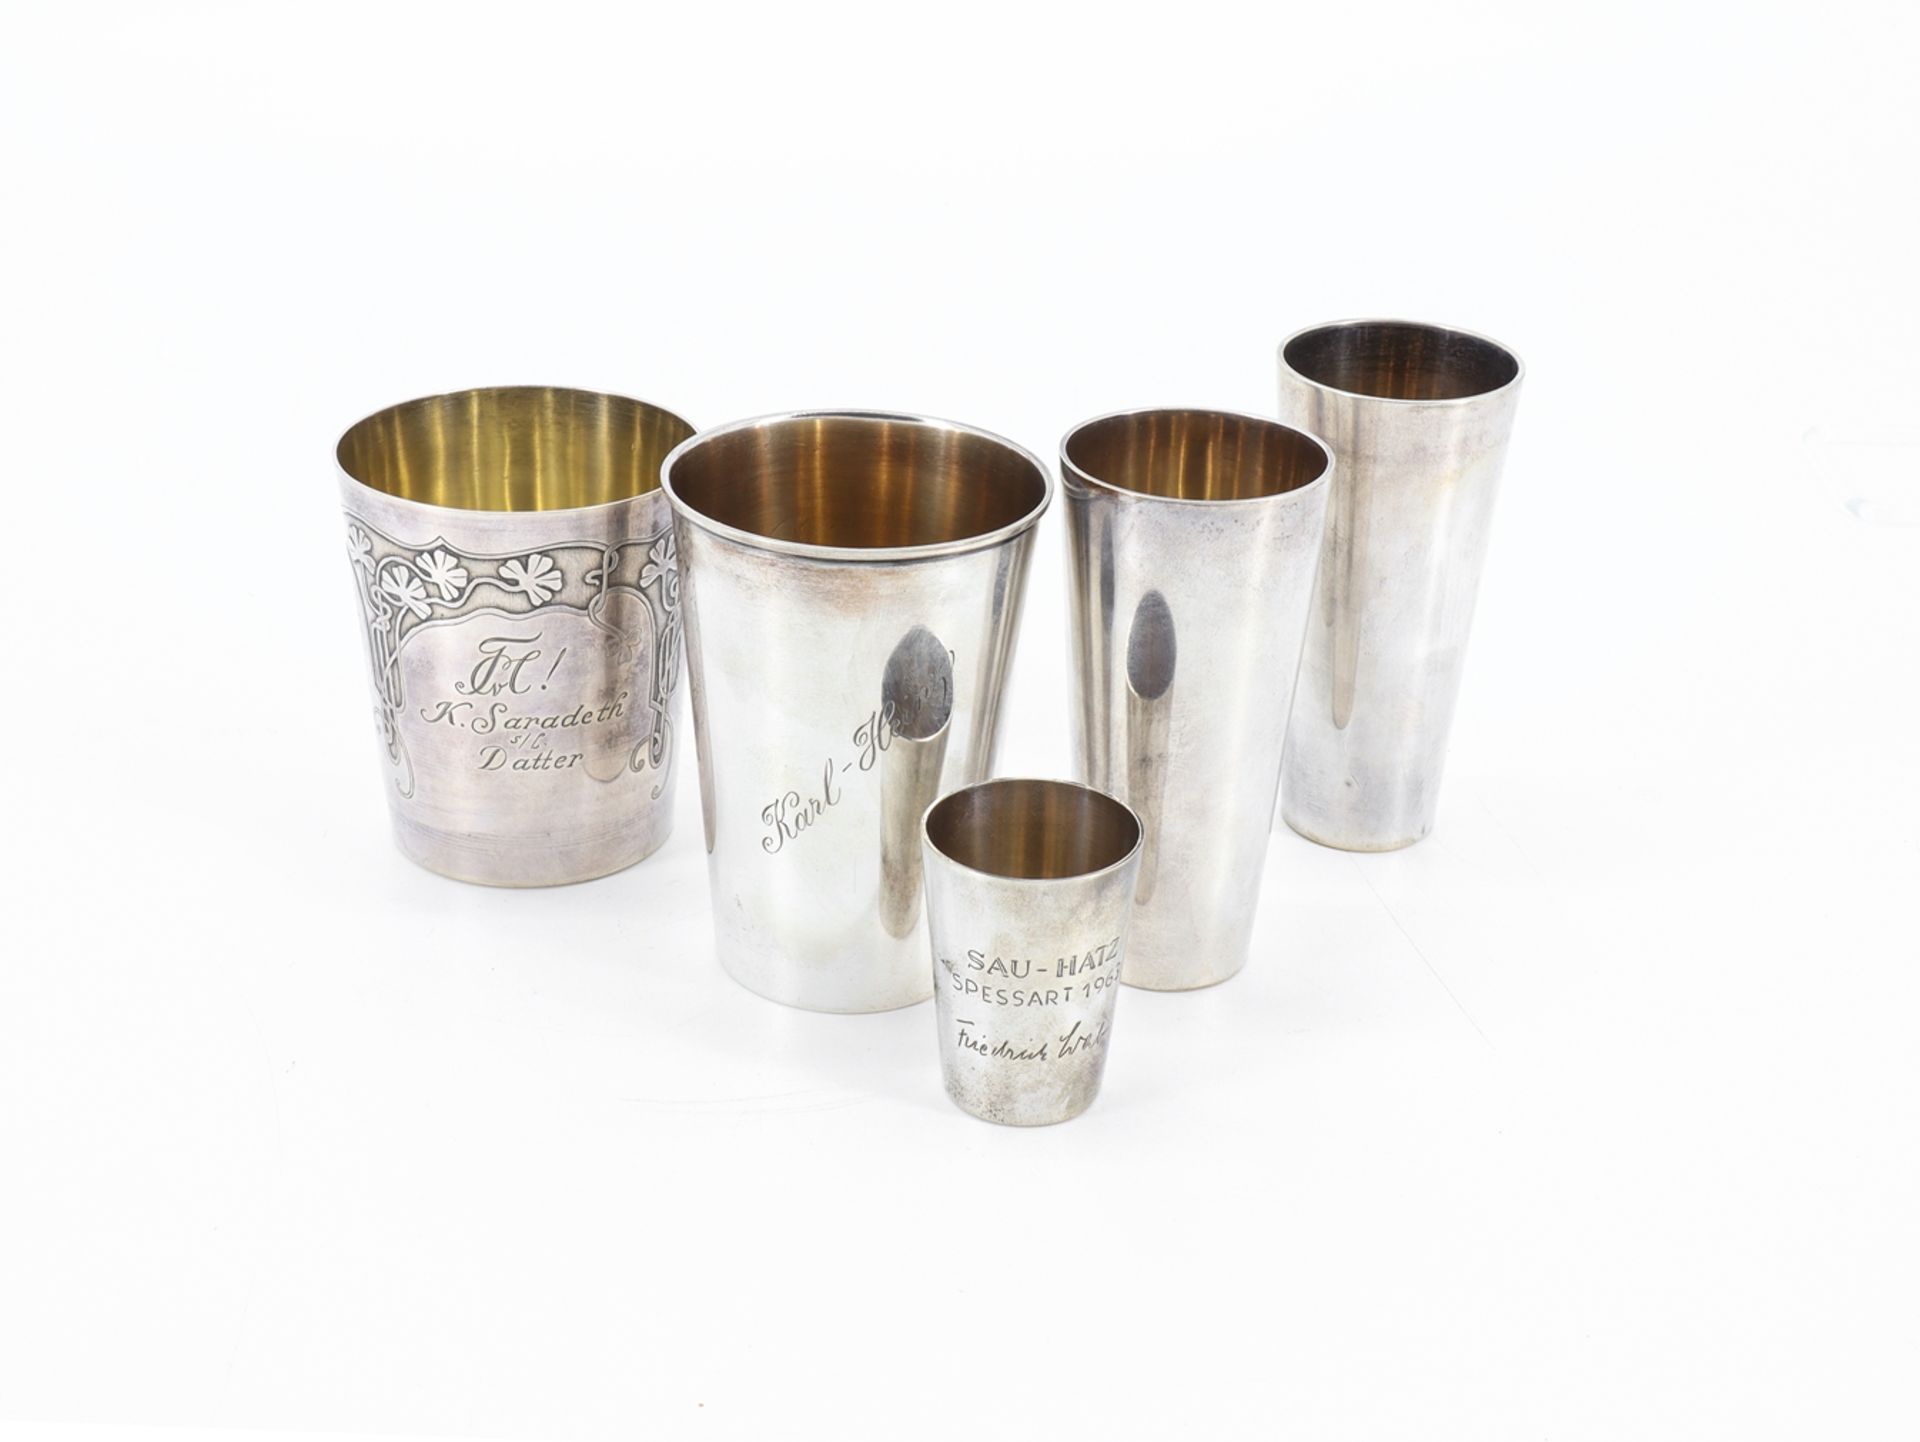 5 silver cups, gilded, 800 silver, 1900 - 1920 - Image 4 of 4